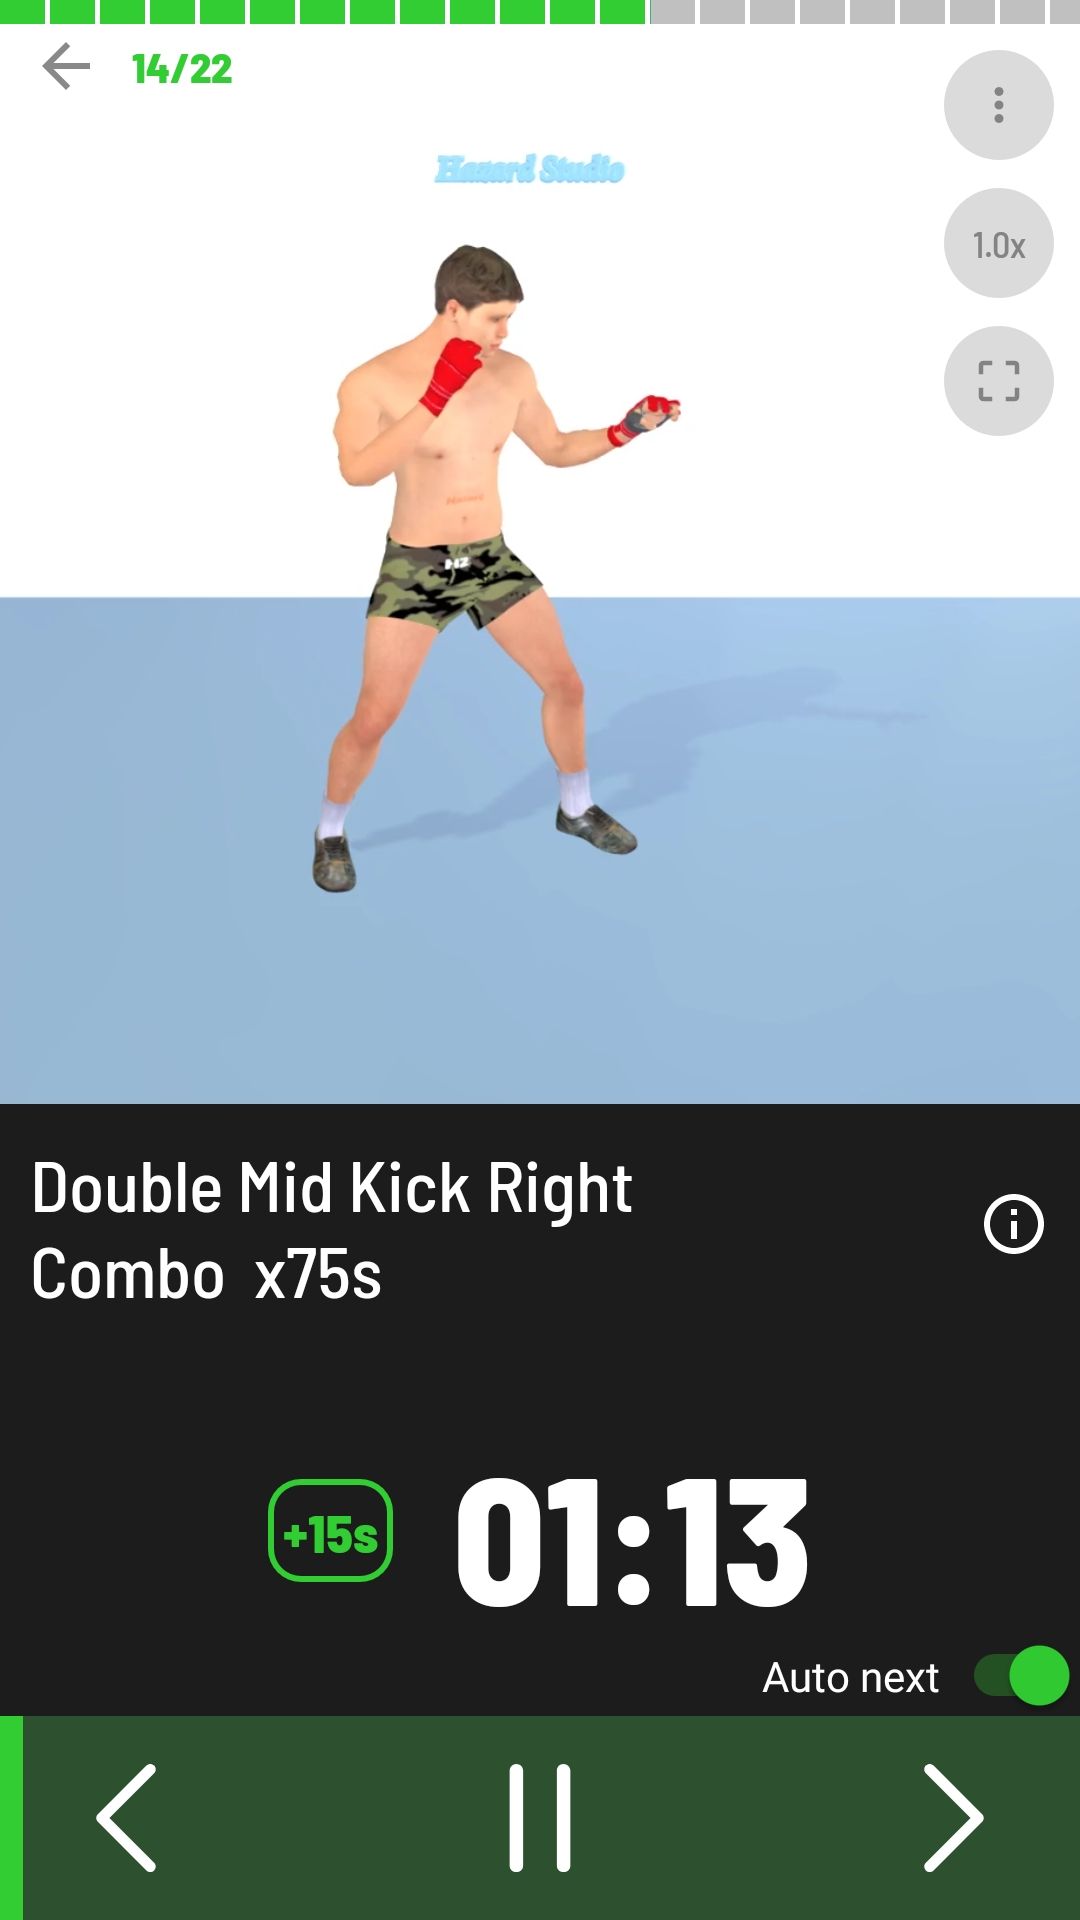 Kickboxing Fitness Workout mobile fitness app combo